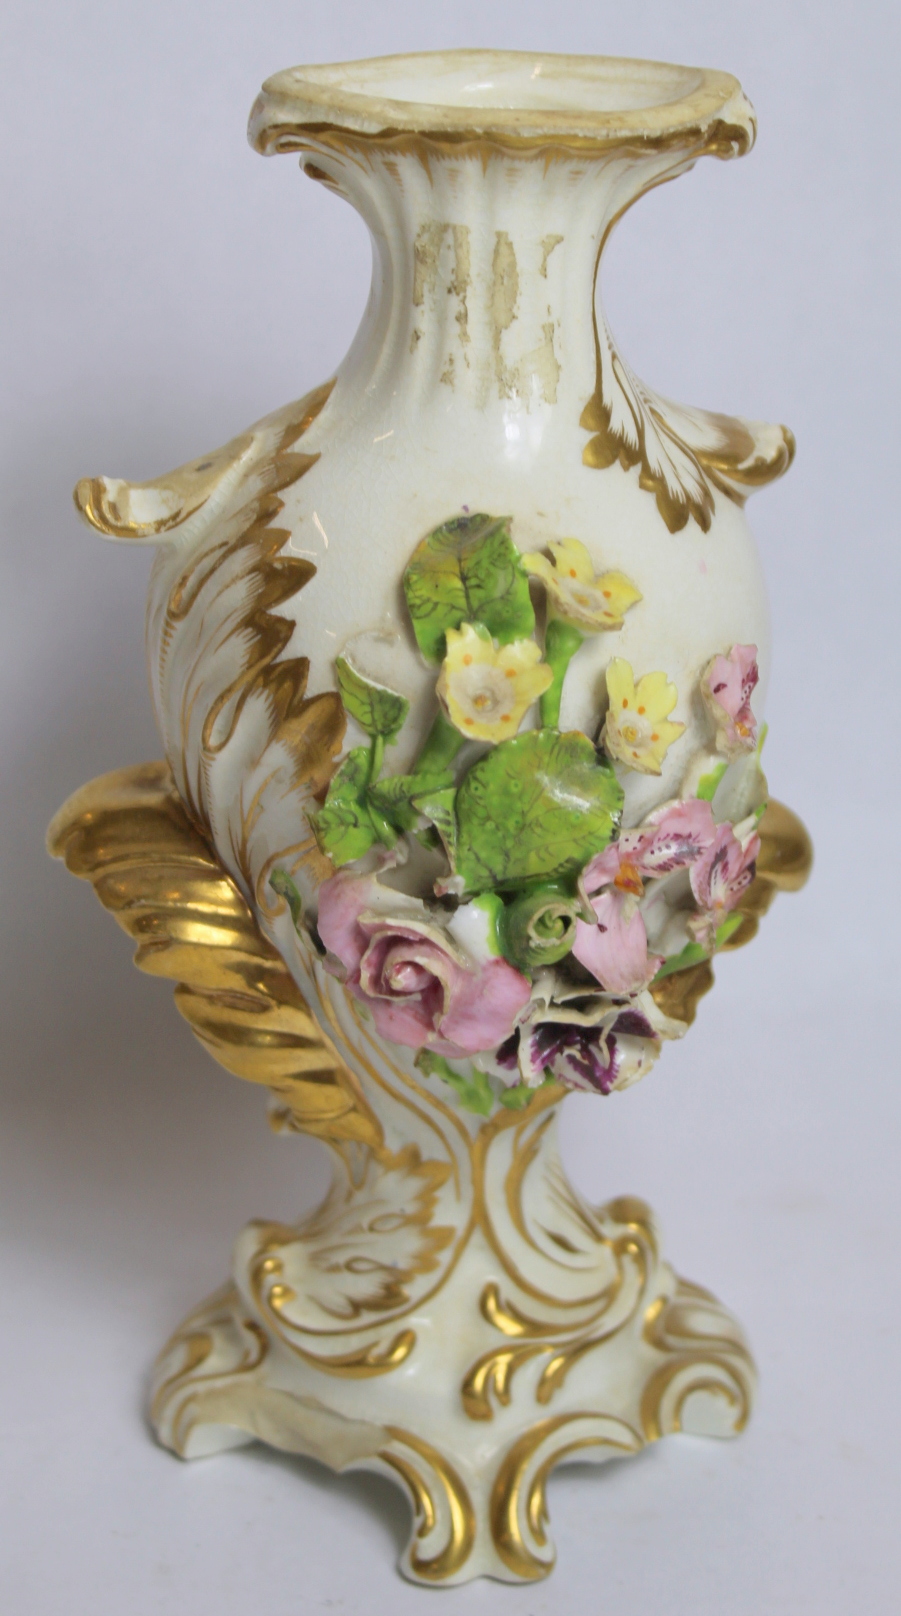 Early 19th century Derby porcelain vase with floral encrustation and moulded gilt foliate scrolling, - Image 4 of 11